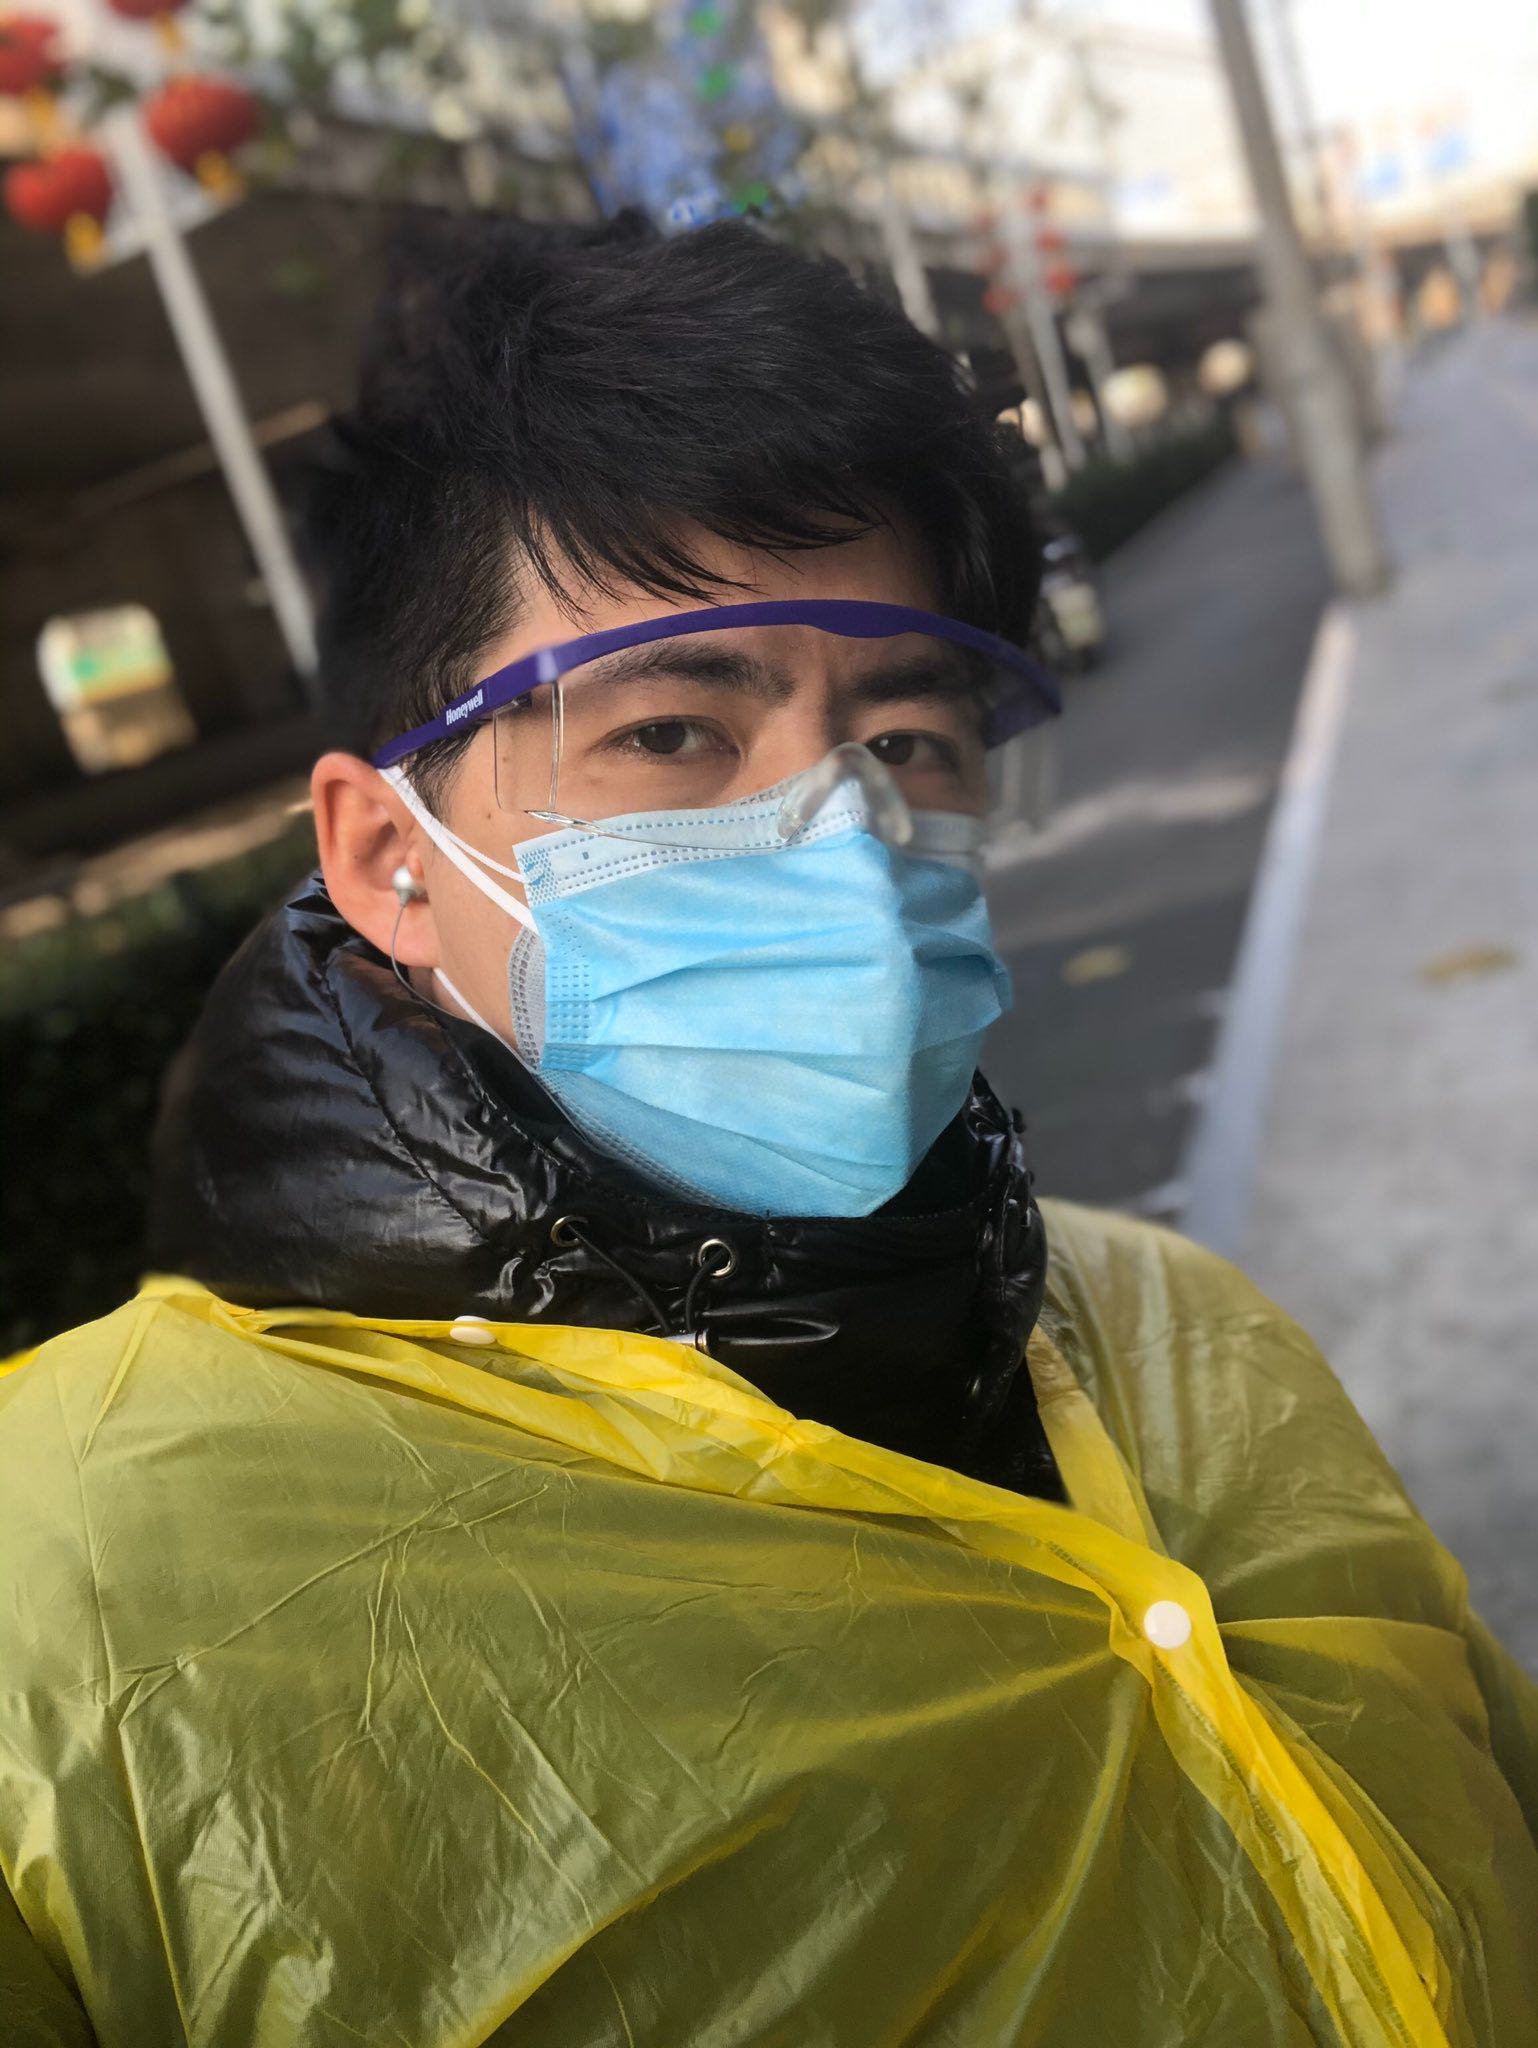 Chen Qiushi, a citizen journalist who has been forced into quarantine.